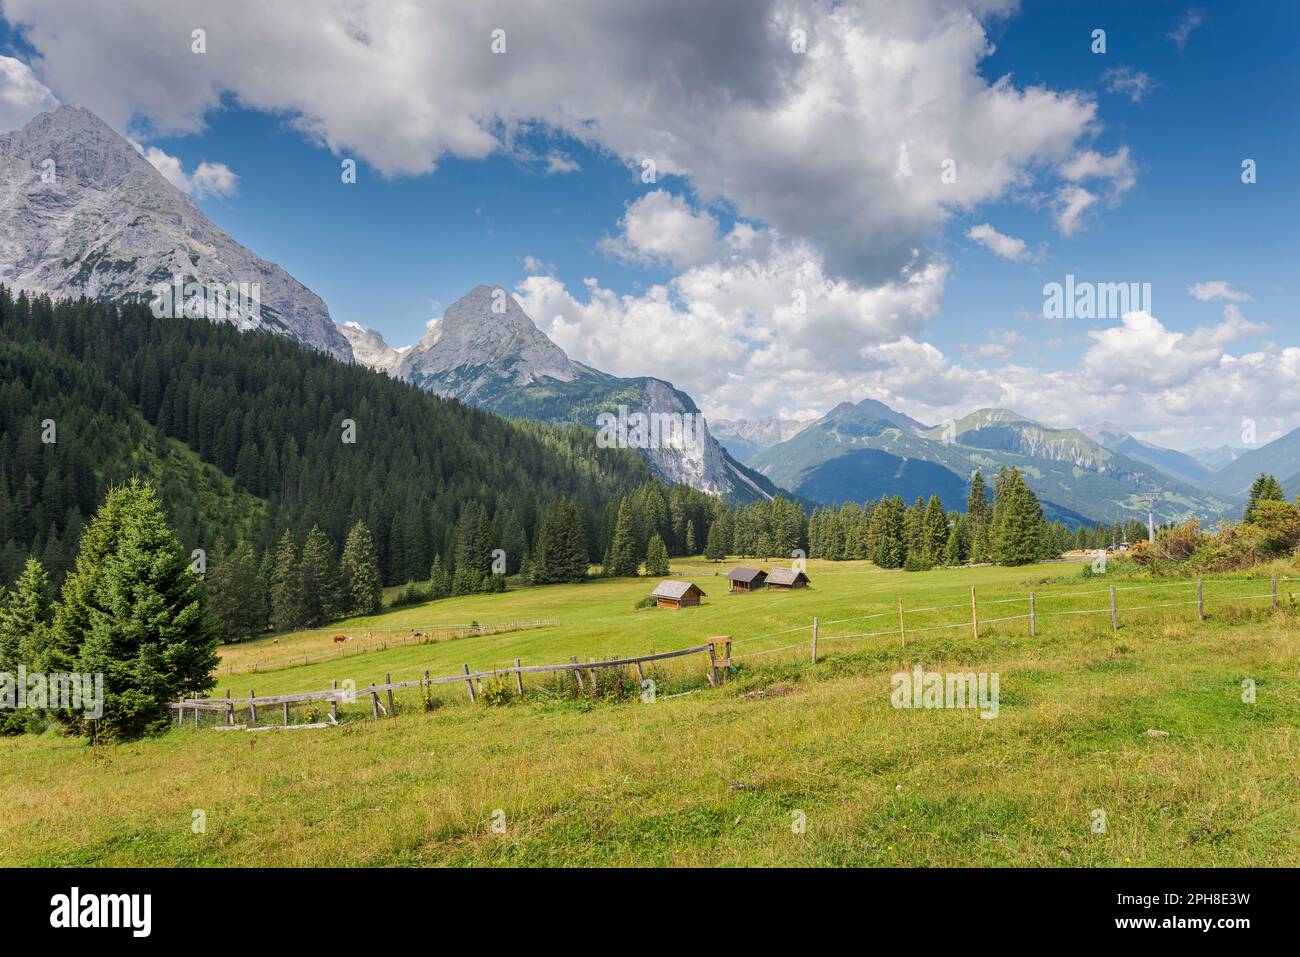 Meadows and forest of Norway spruce, Picea abies, in the Mieming Range, State of Tyrol, Austria. Stock Photo